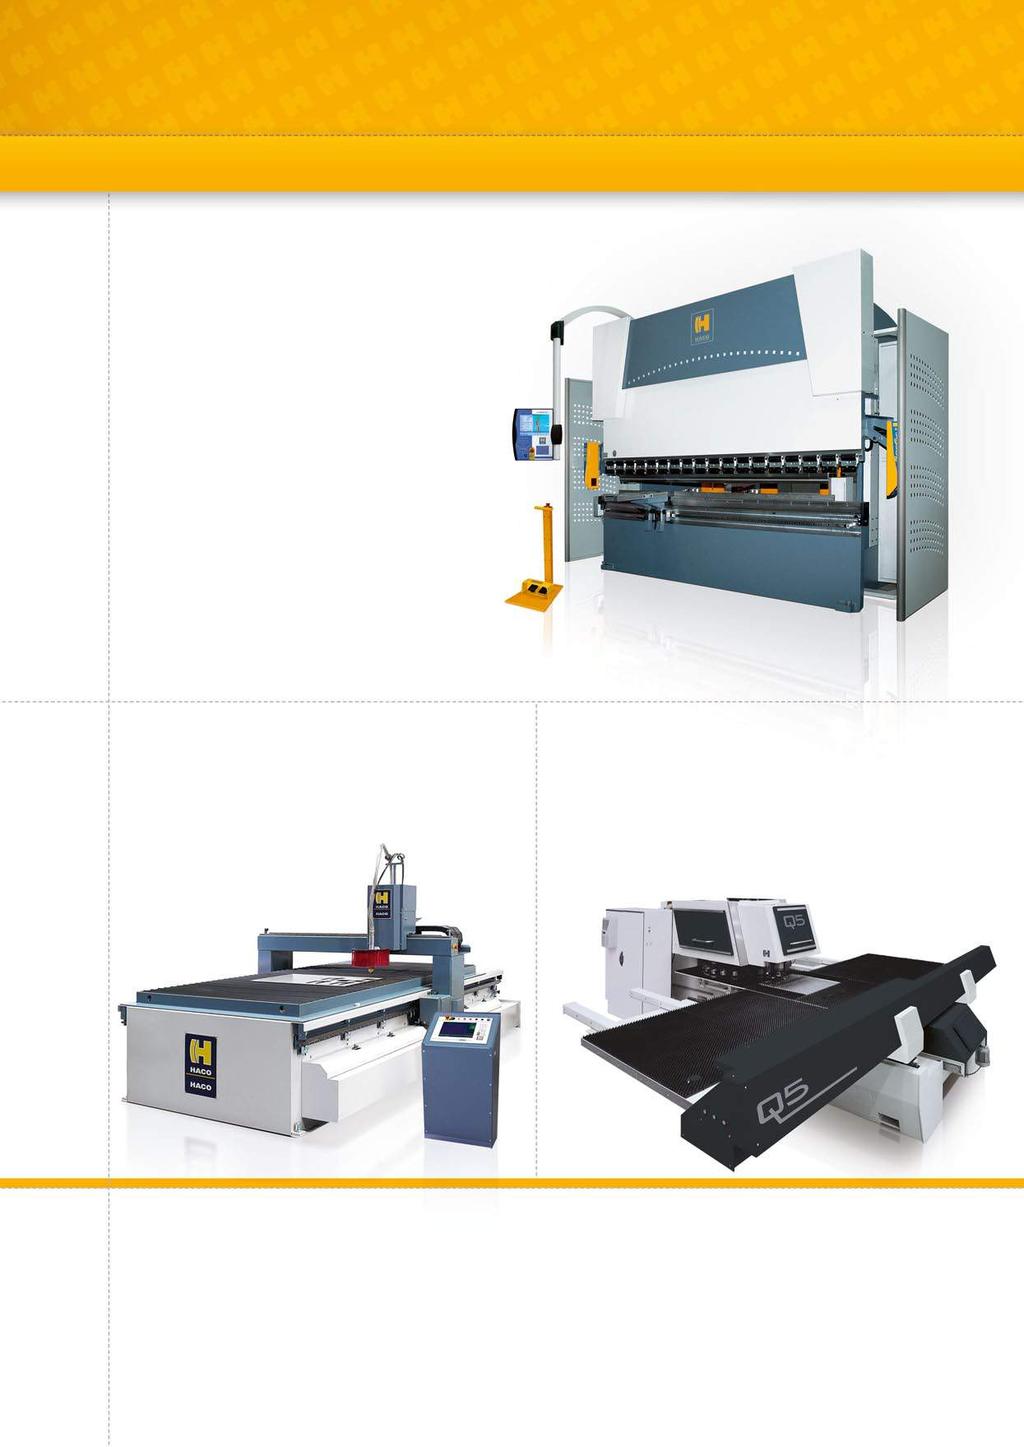 HACO offers ALSO: 01 Hydraulic Press brakes Hydraulic conventional press brakes, type PPM. Up to 10 axis CNC-controlled hydraulic press brakes, type Synchromaster, Euromaster and HDSY.